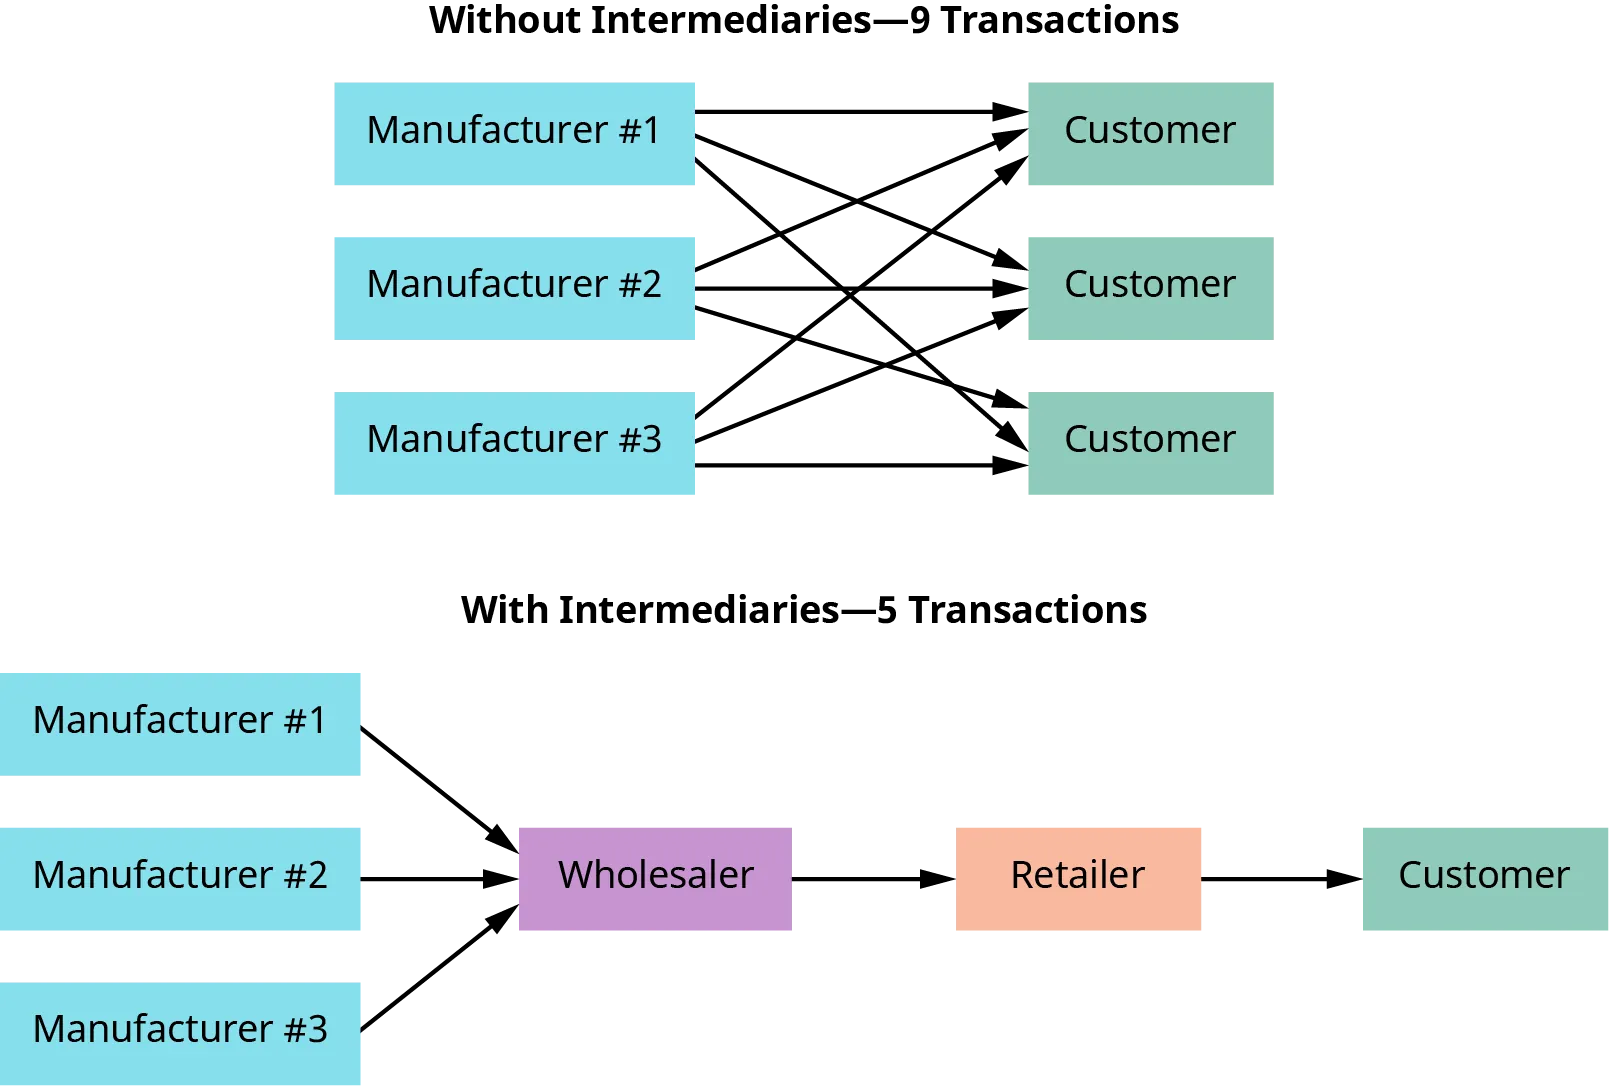 The first part of the image shows the nine transactions that occur without intermediaries. They are: Manufacturer number 1 selling to three different customers (3 transactions). Manufacturer number 2 selling to three different customers (3 transactions), and Manufacturer number 3 selling to three different customers (3 transactions), for a total of 9 transactions. The second part of the image shows the 5 transactions that occur with intermediaries. Manufacturers 1, 2, and 3 each sell to a wholesaler (3 transactions). The wholesaler sells to a retailer (1 transaction) and the retailer sells to the customer (1 transaction) for a total of 5 transactions.